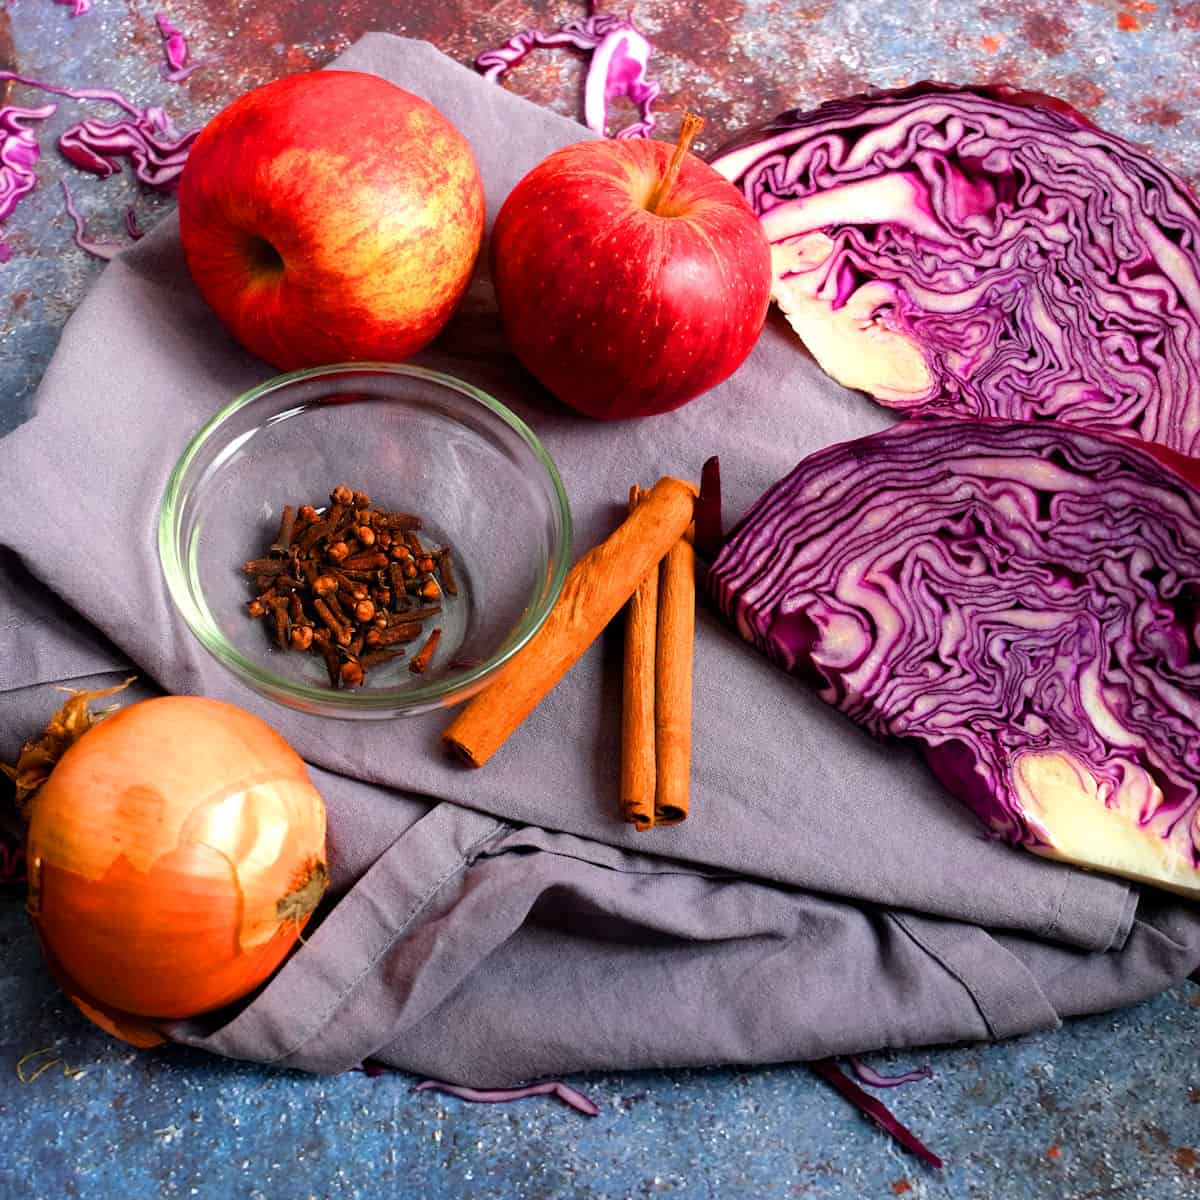 ingredients for German red cabbage